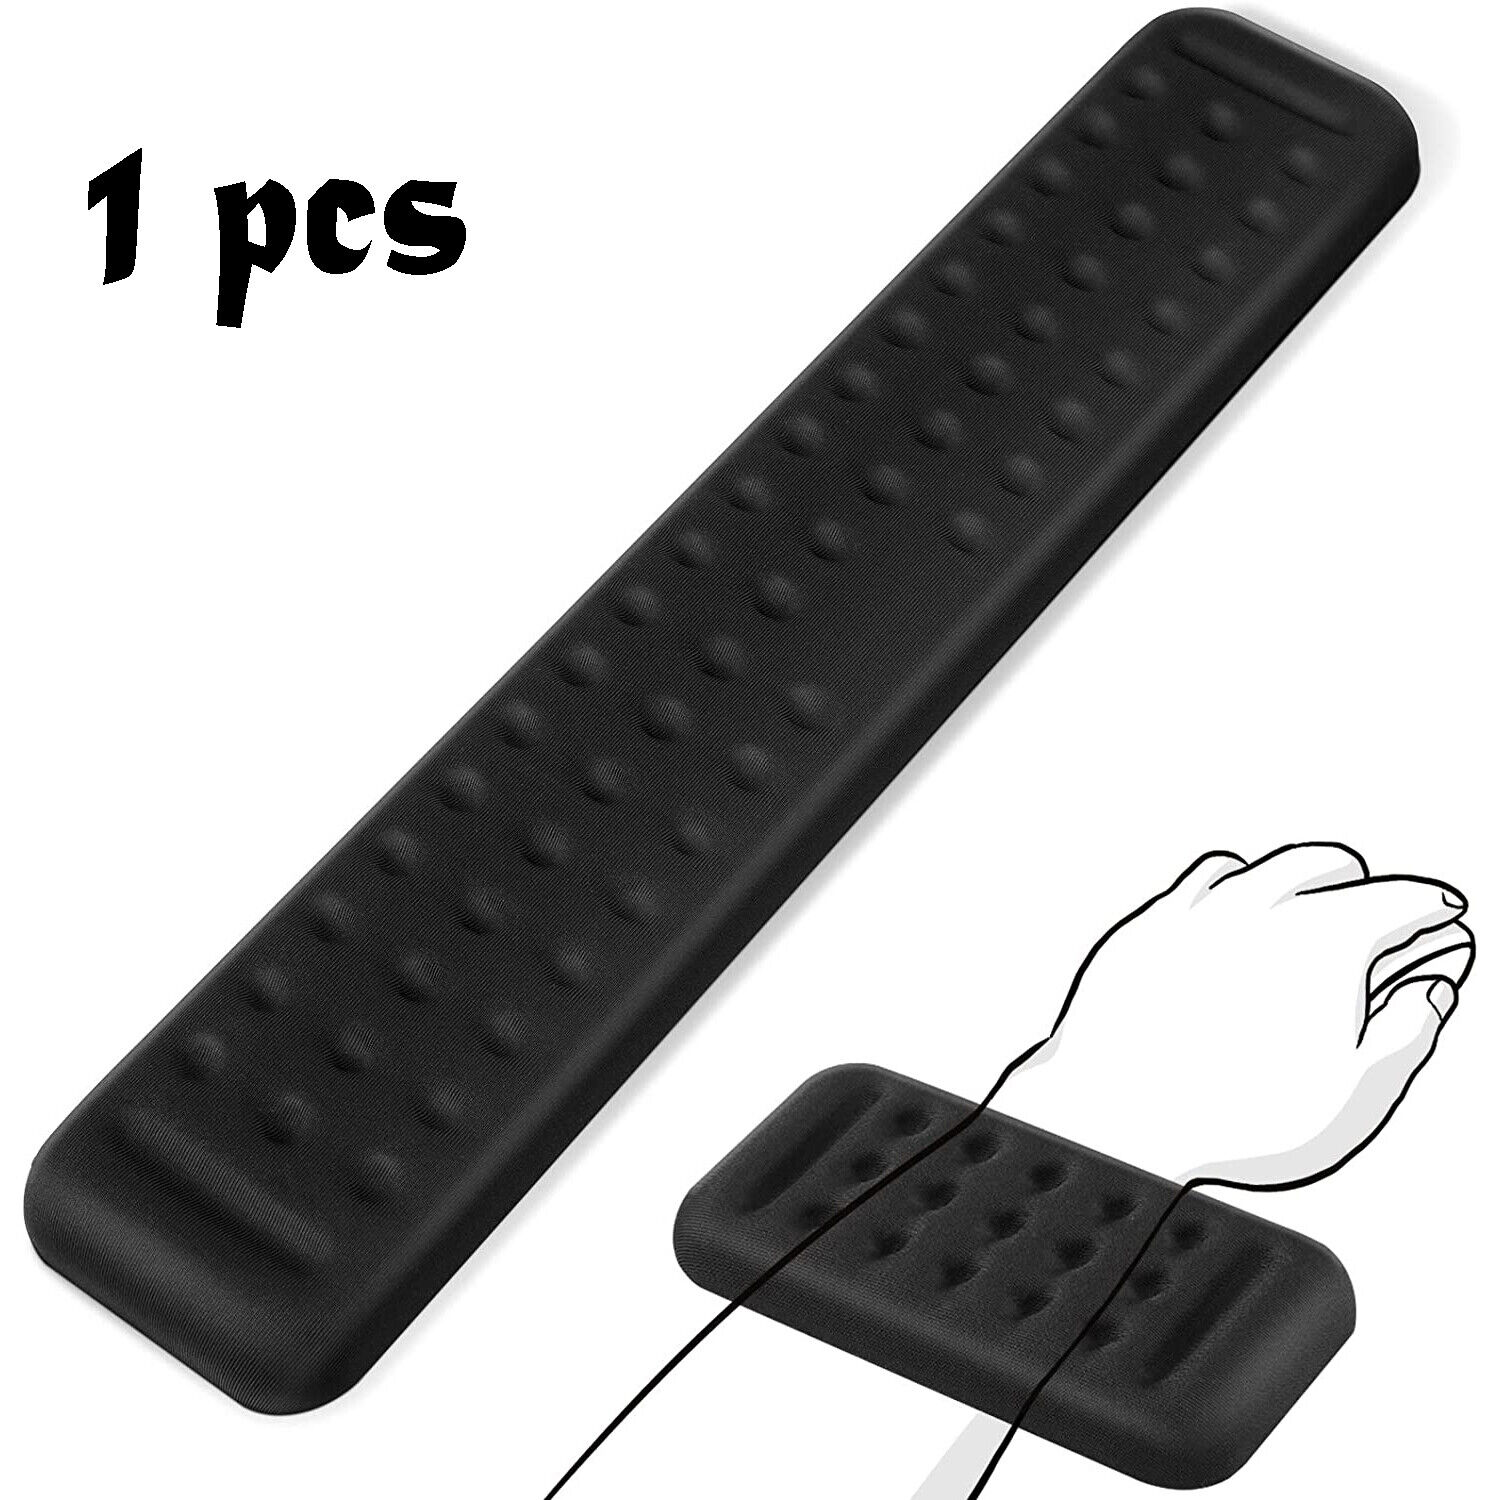 Keyboard Wrist Pain Rest Memory Foam Support Pad for Office, Computer, Laptop